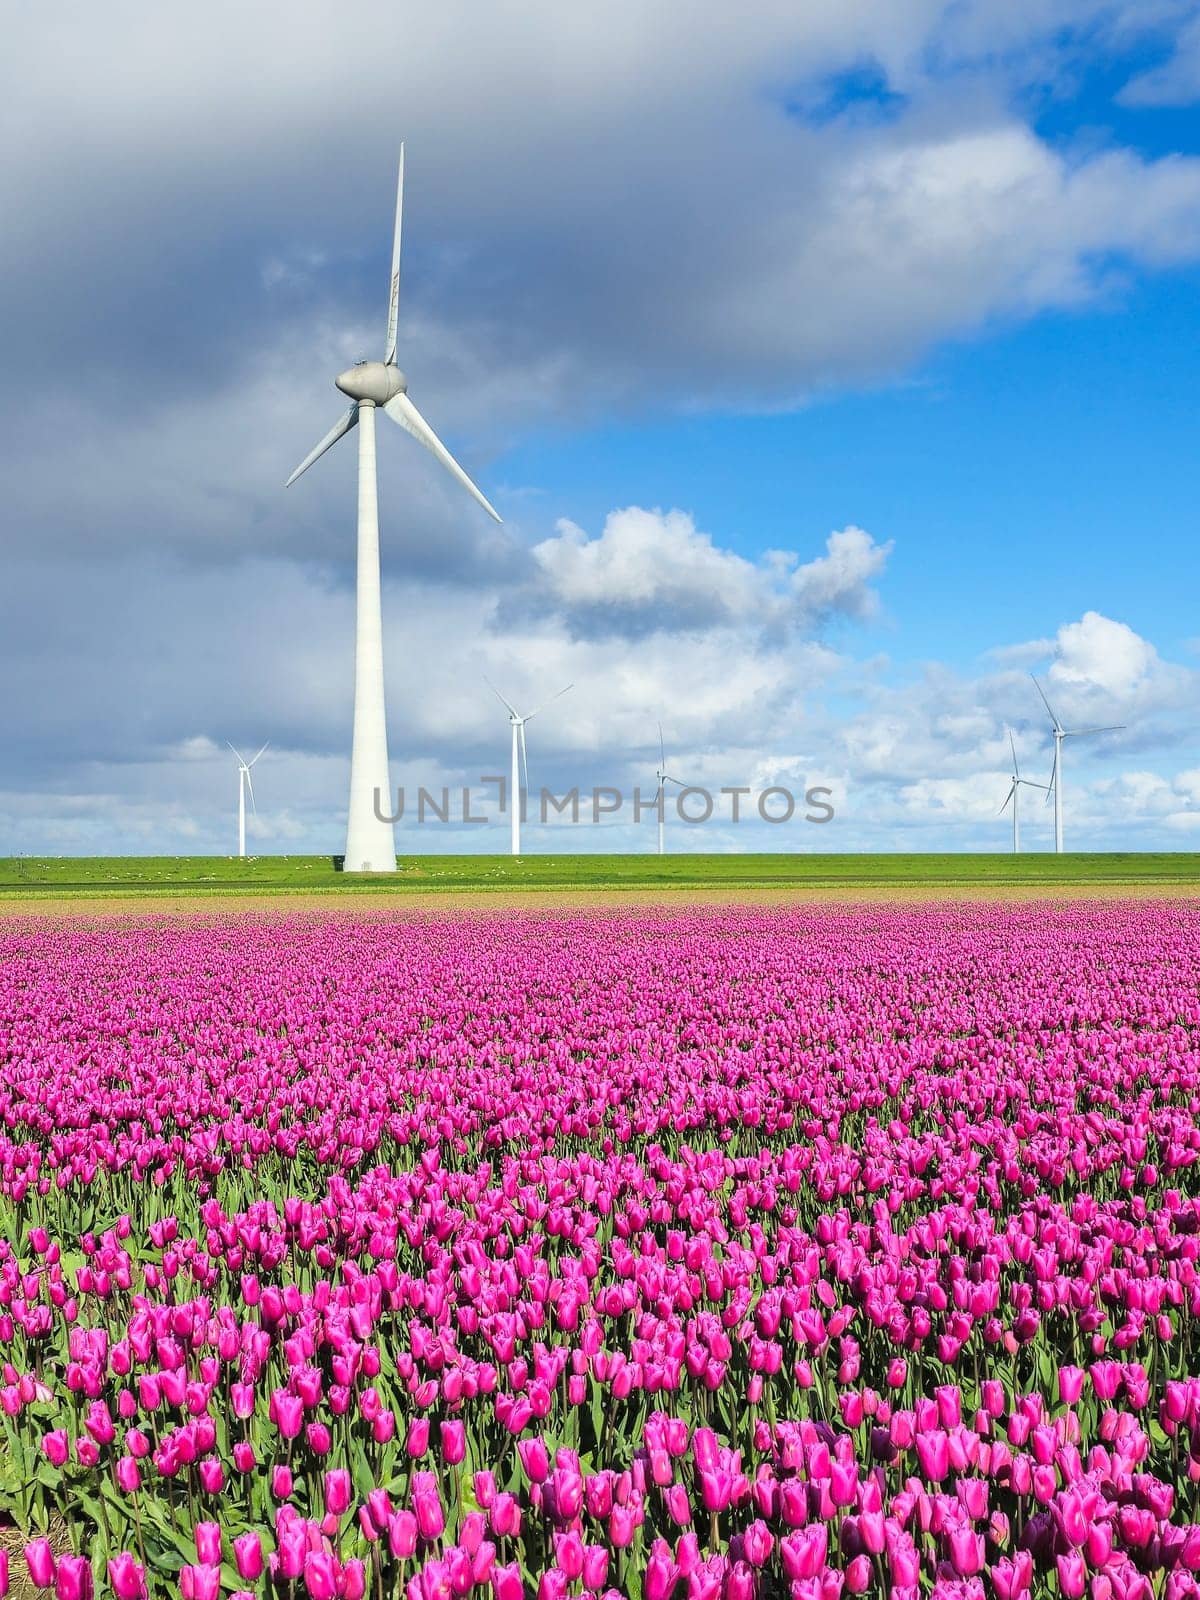 A picturesque scene of a field of colorful flowers swaying in the wind, with a windmill in the background against a bright Spring sky in the Noordoostpolder Netherlands, green energy